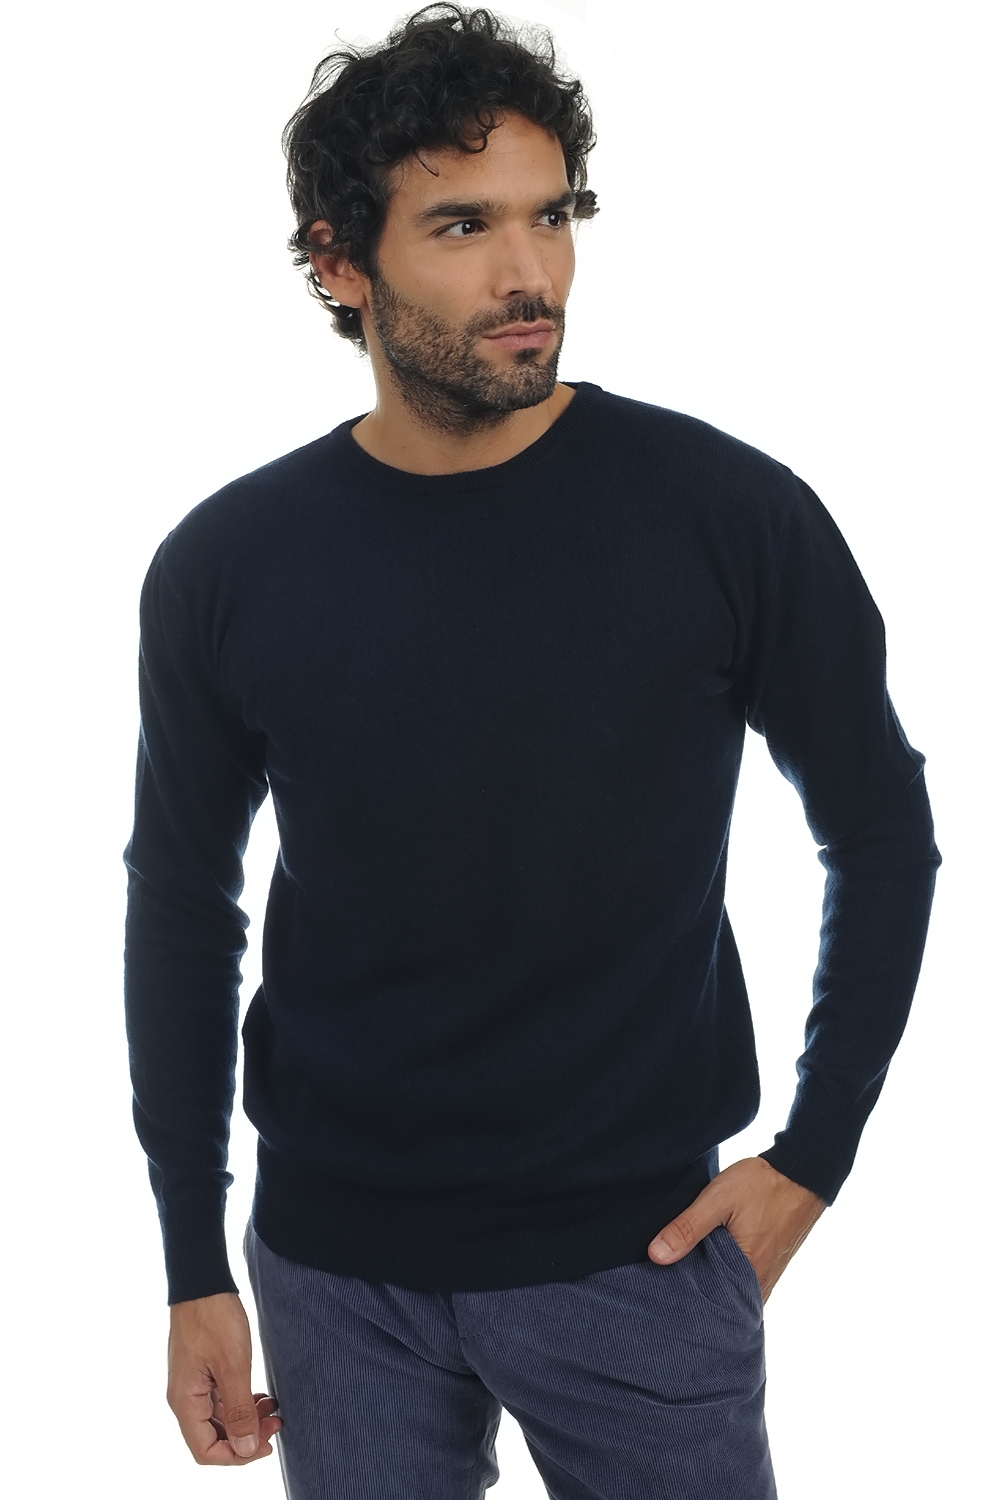 Cachemire pull homme col rond keaton marine fonce 3xl